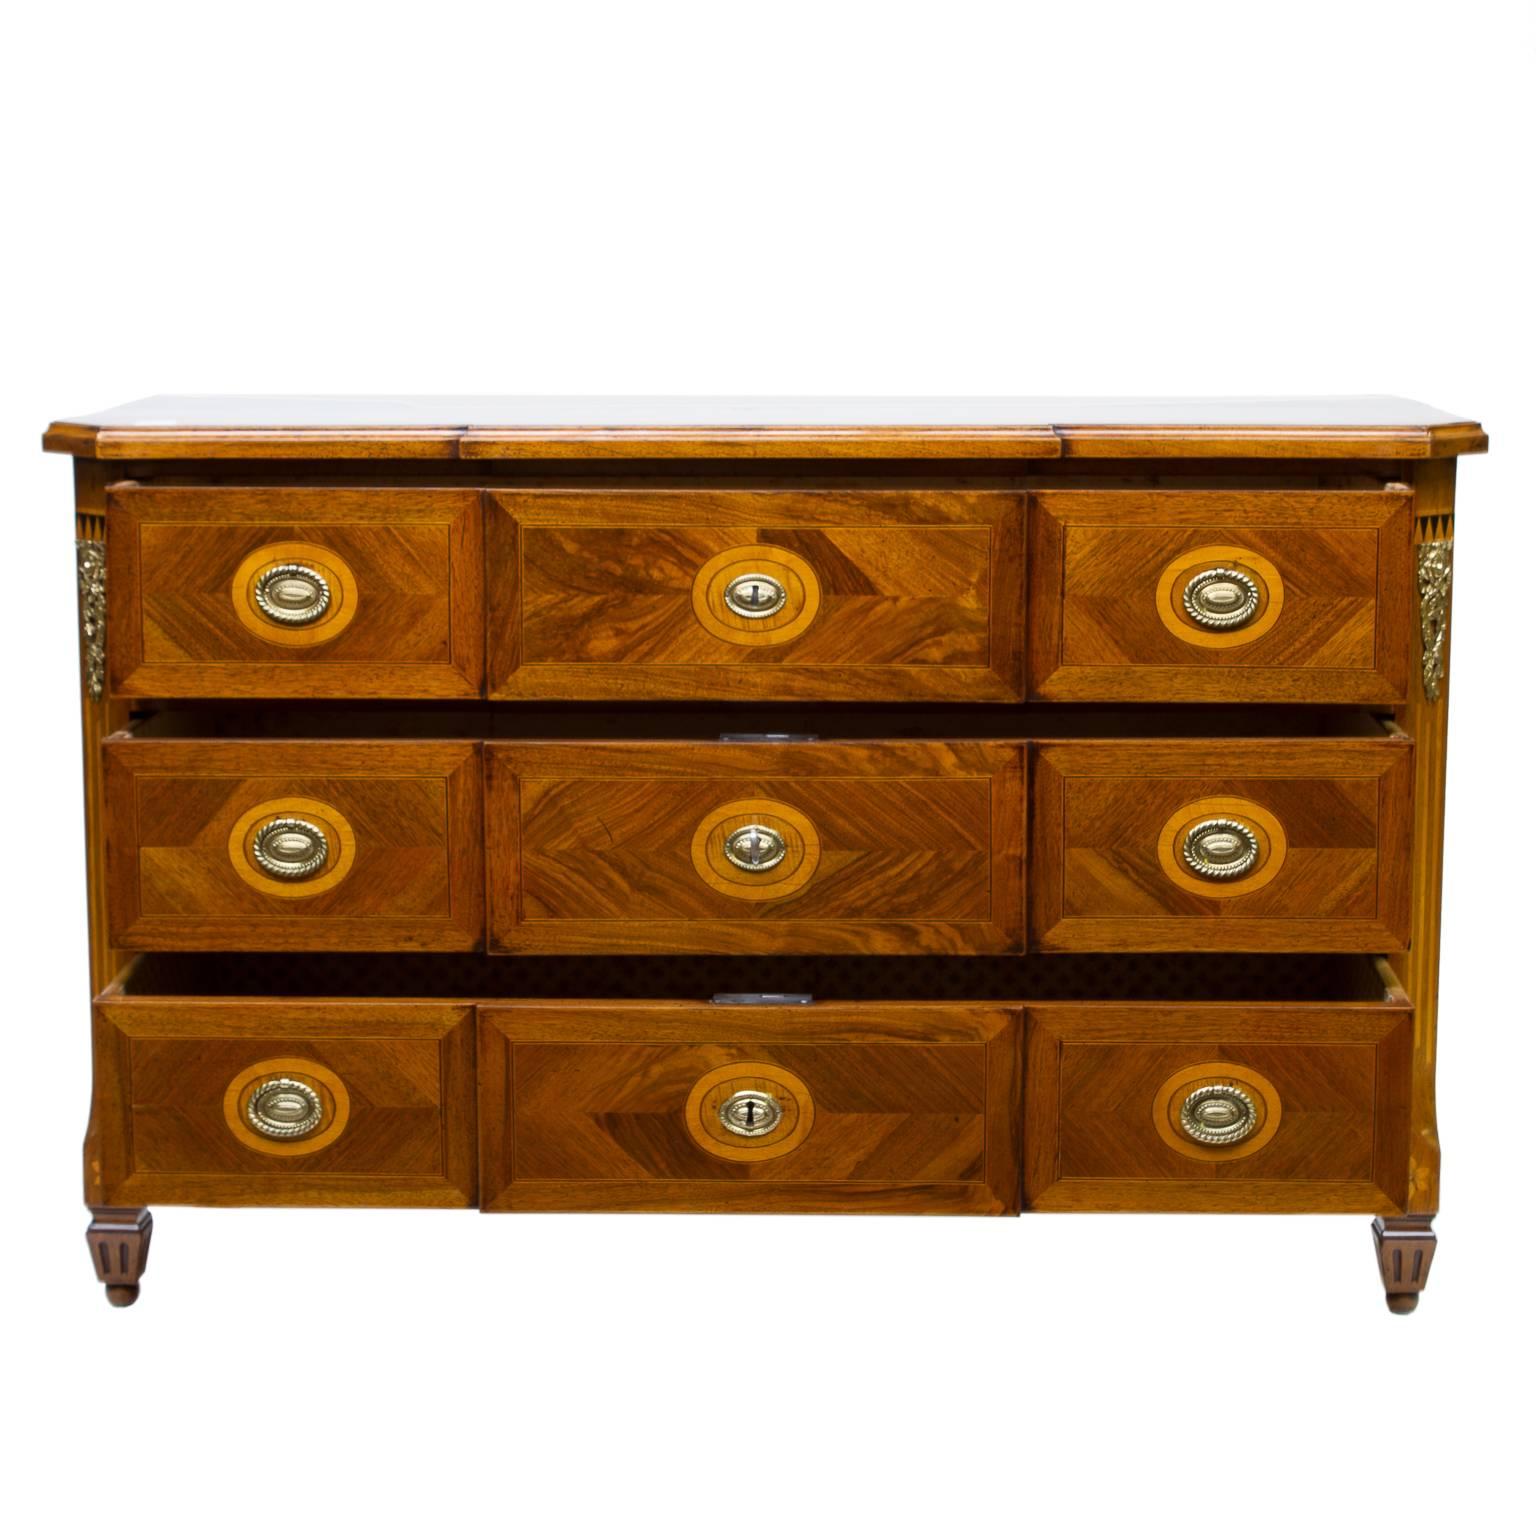 19th century Italian walnut three-drawer breakfront commode. This commode is decorated with figured cuts of quality woods. Giving the dramatic look. The front has oval pulls surrounded by oval inlays (nice touch). Corners chamfered with inlays